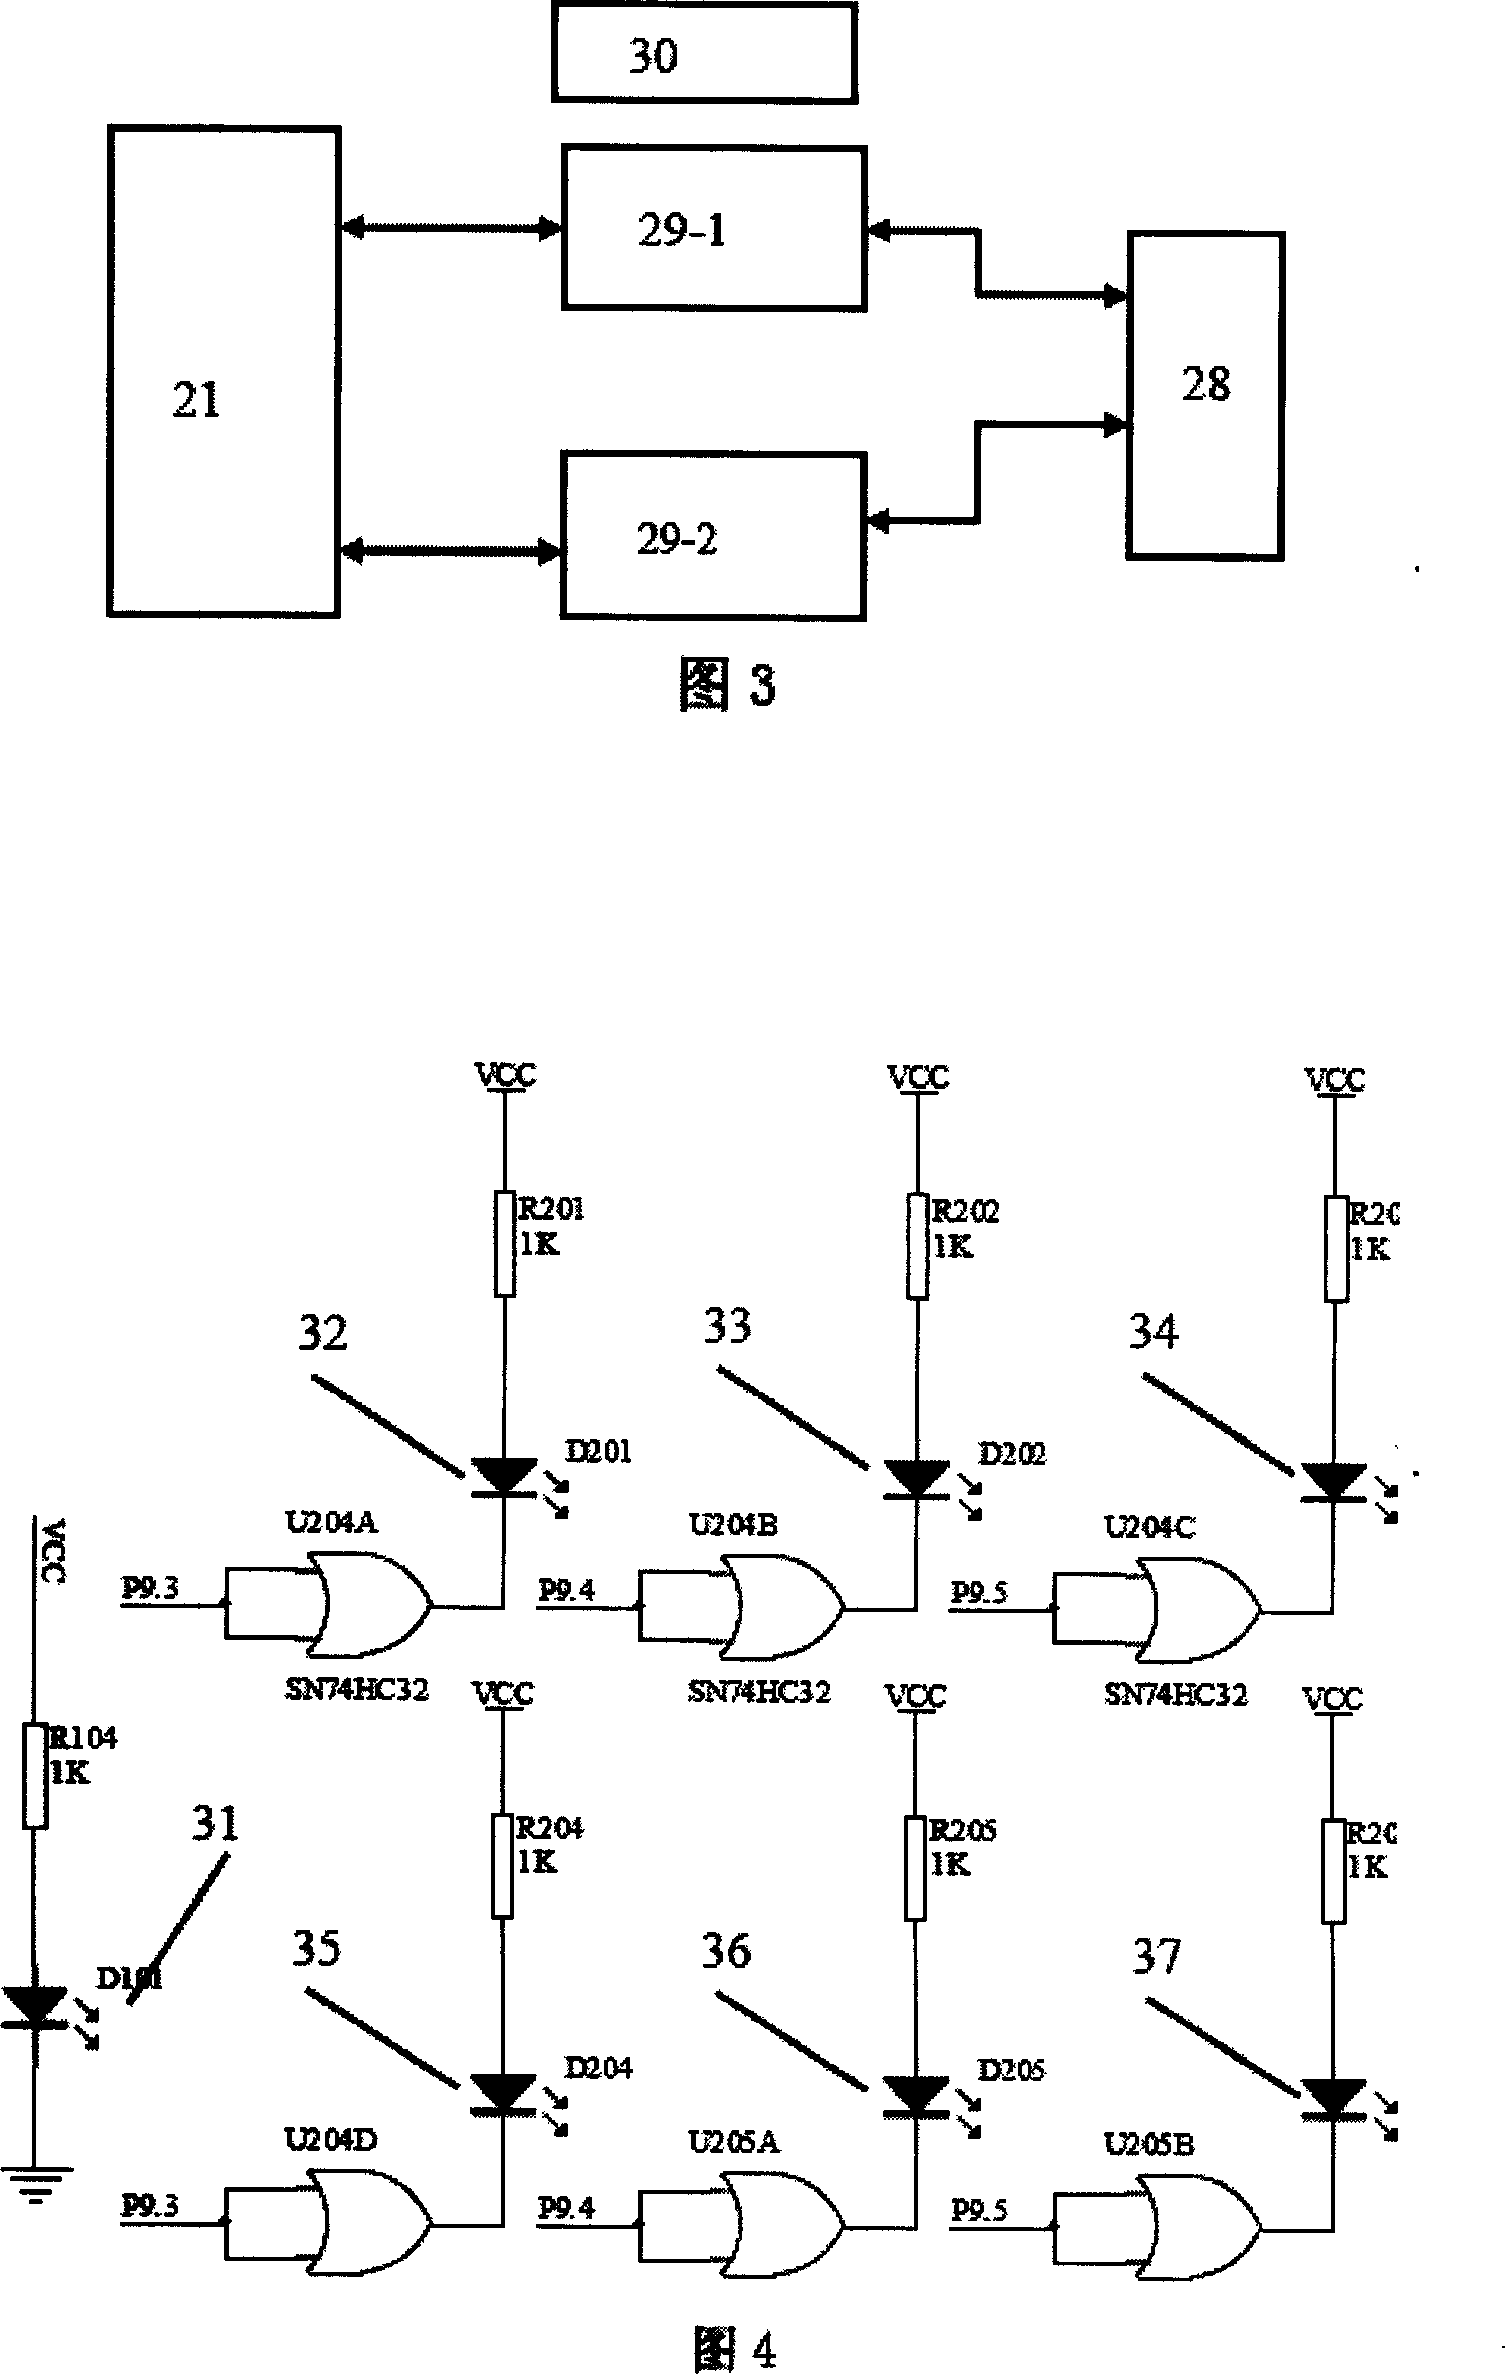 A system used for electric-controlled vehicle radio remote monitoring, marking and failure diagnosis